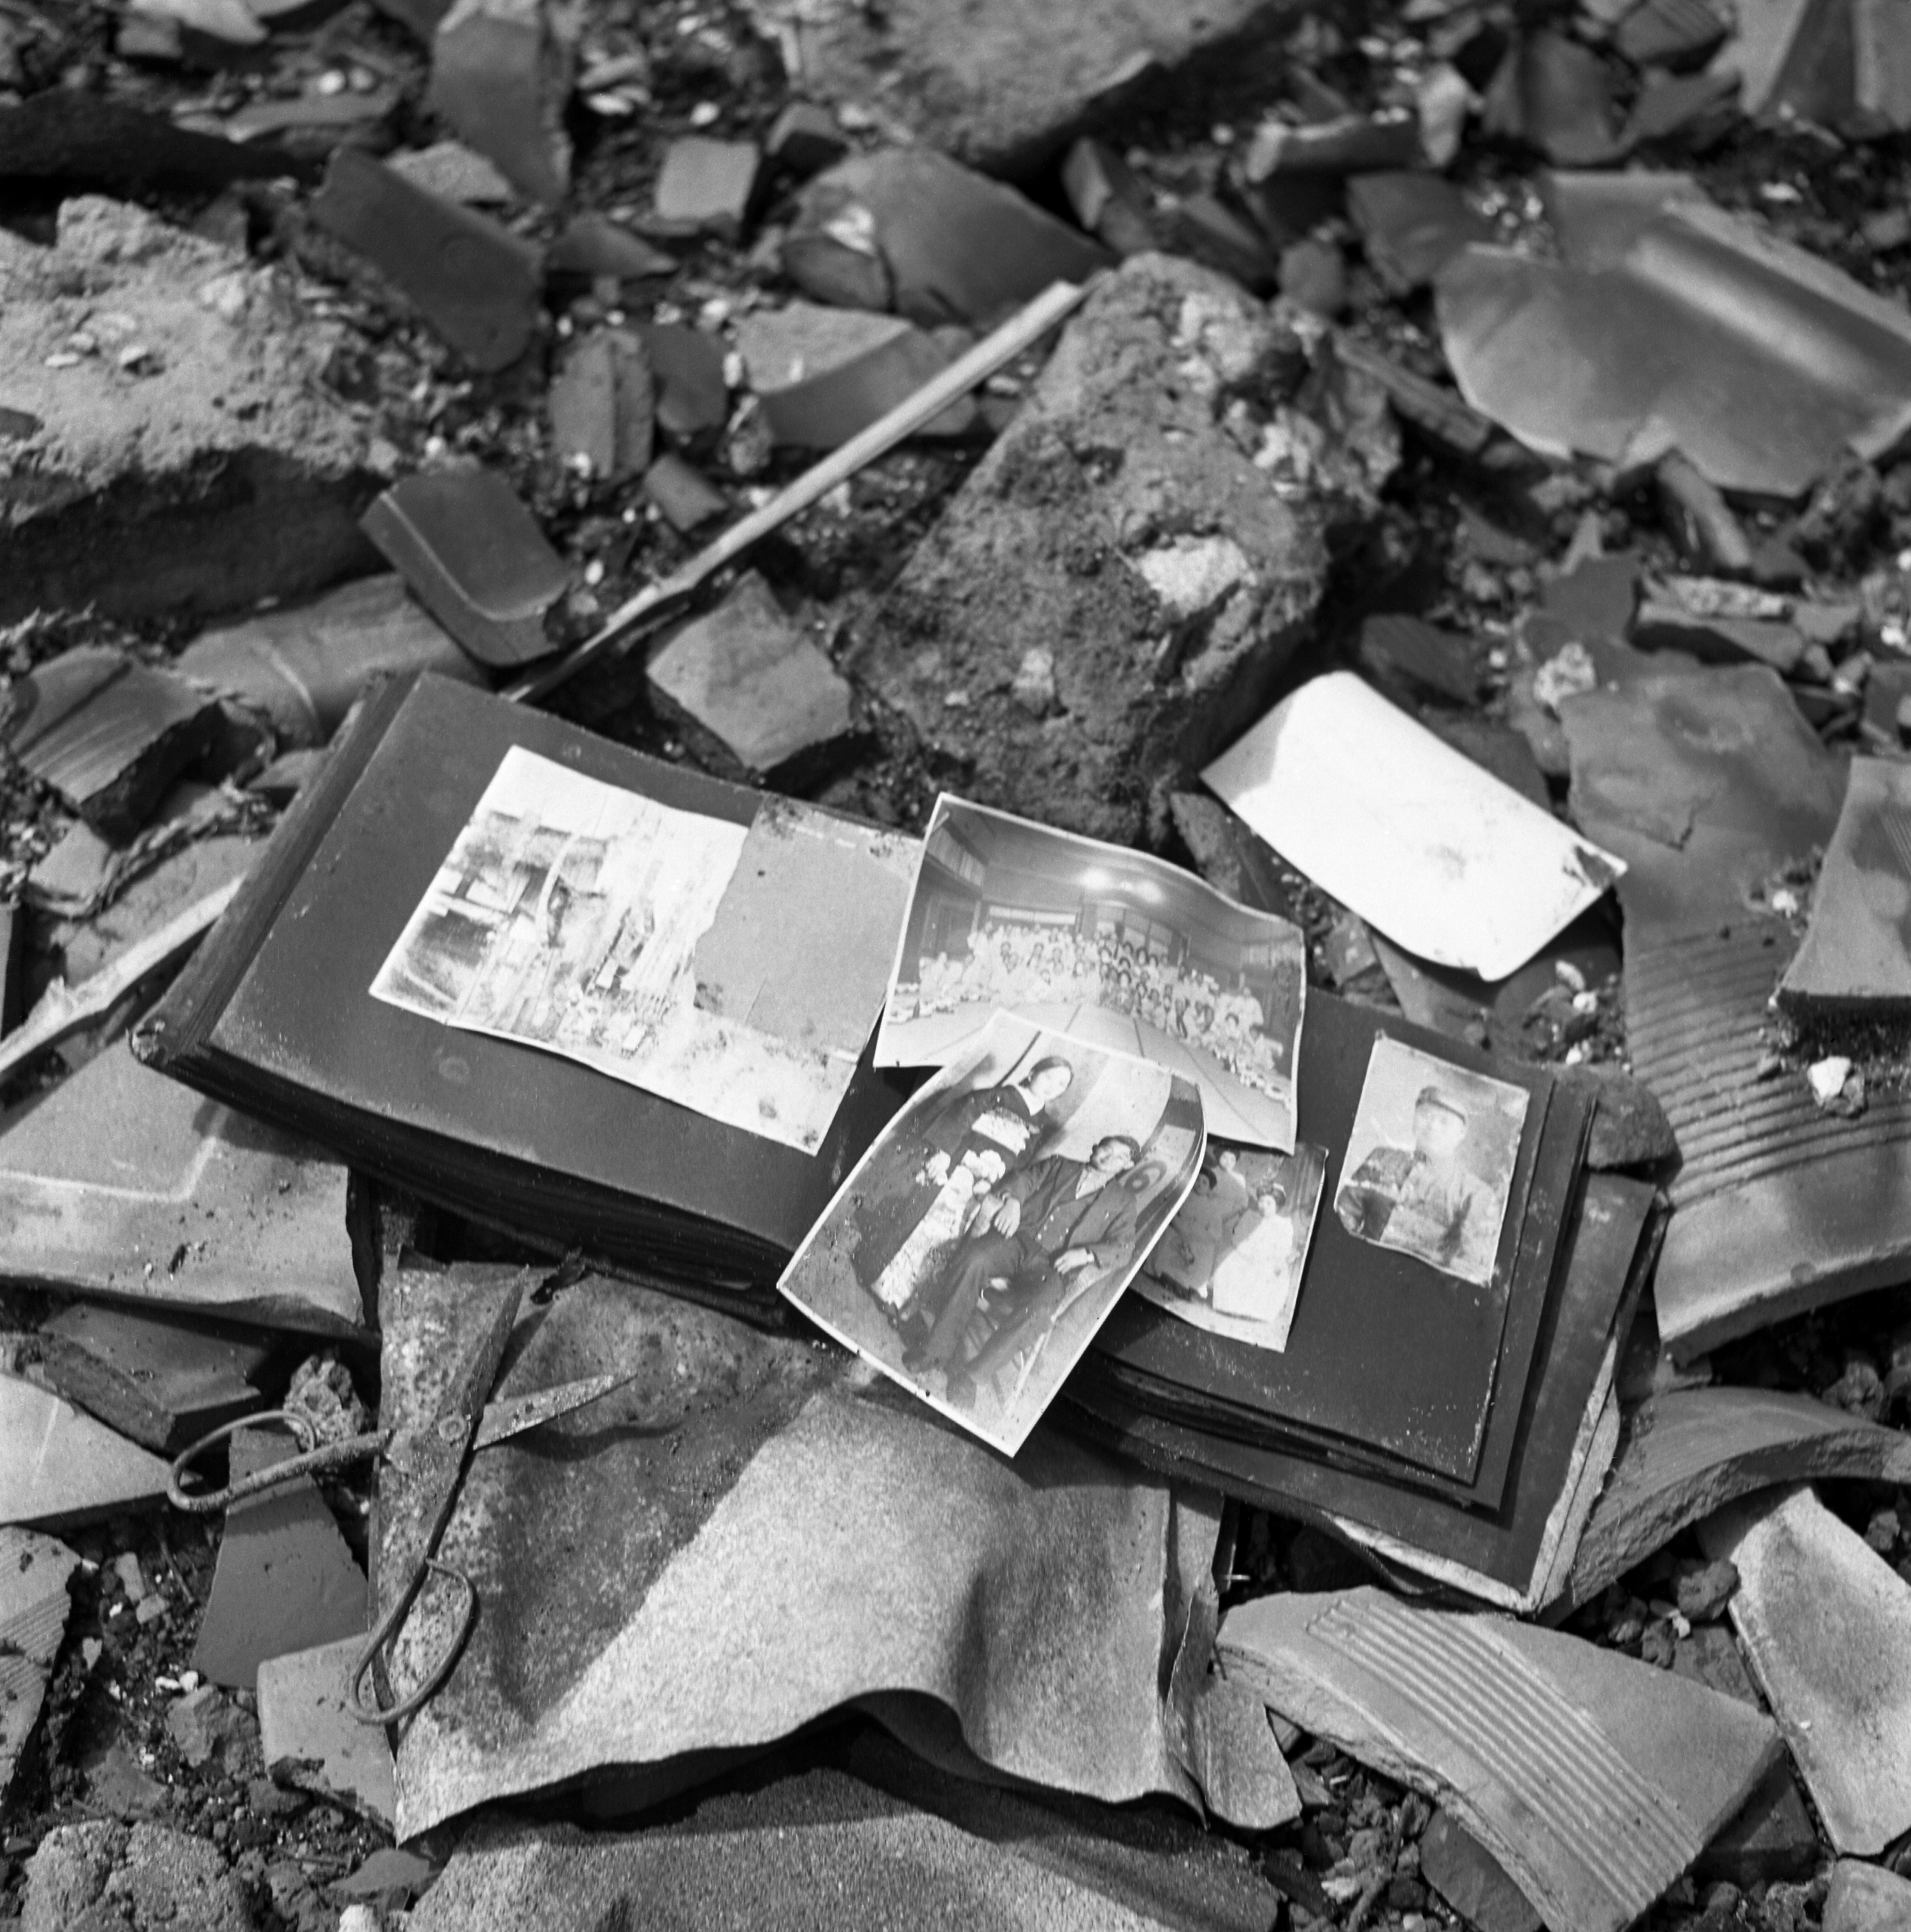 A photo album, pieces of pottery, a pair of scissors — shards of life strewn on the ground in Nagasaki, 1945.